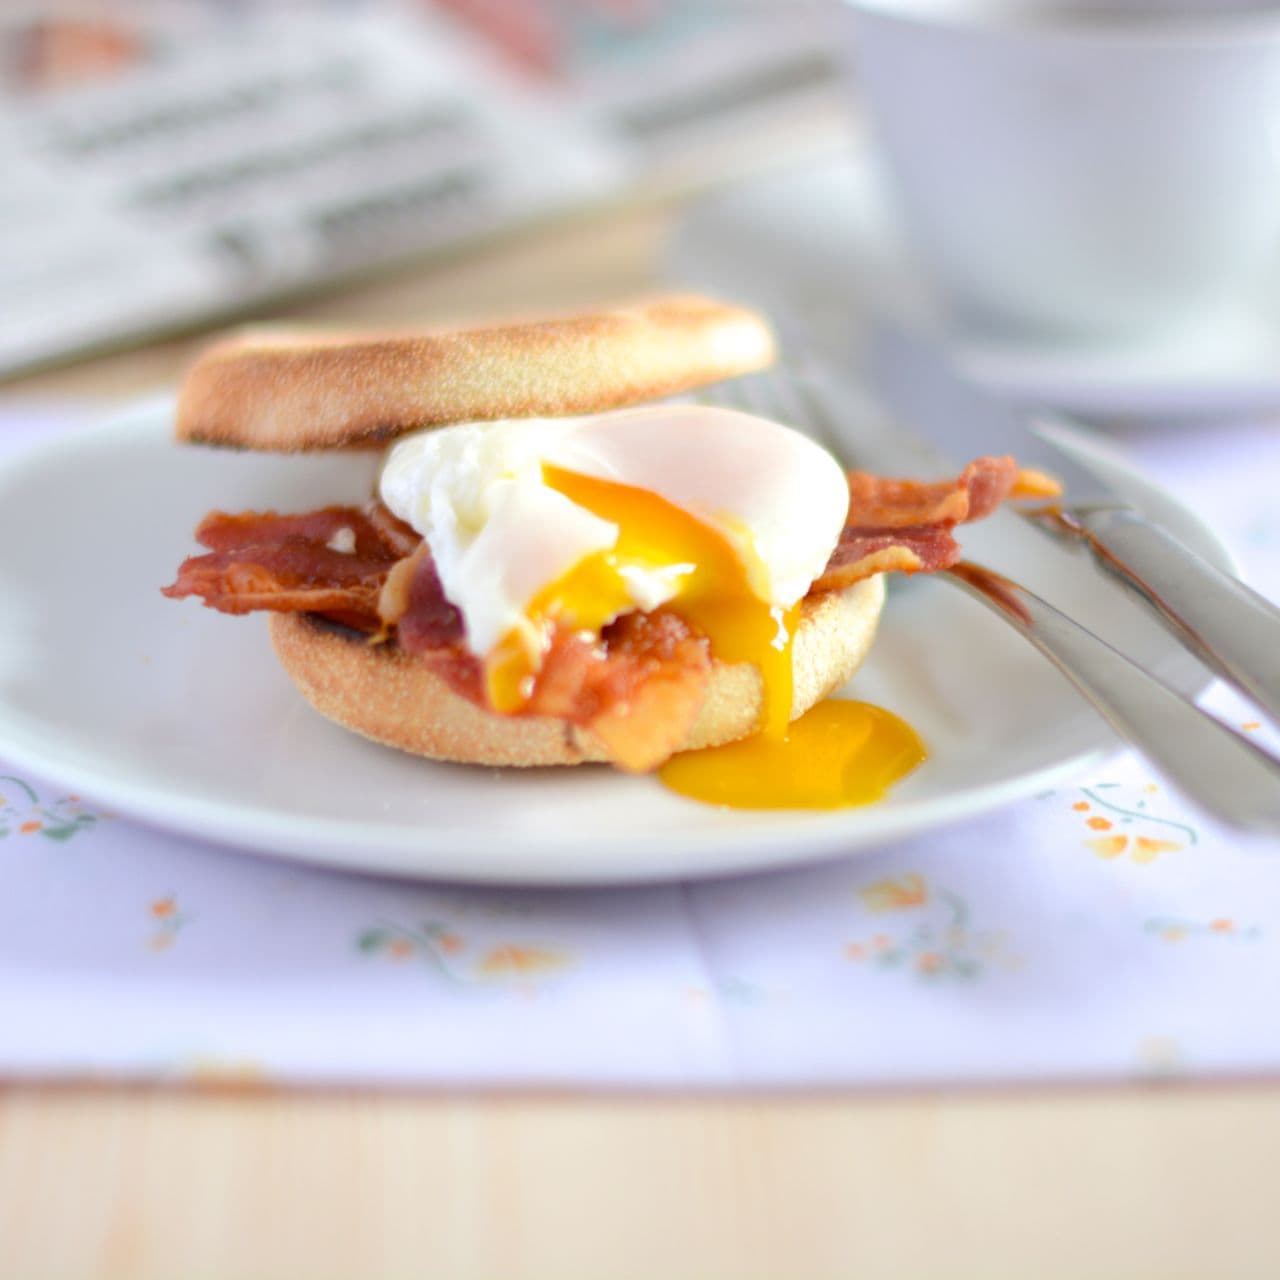 Step-by-step guide to the perfect poached egg